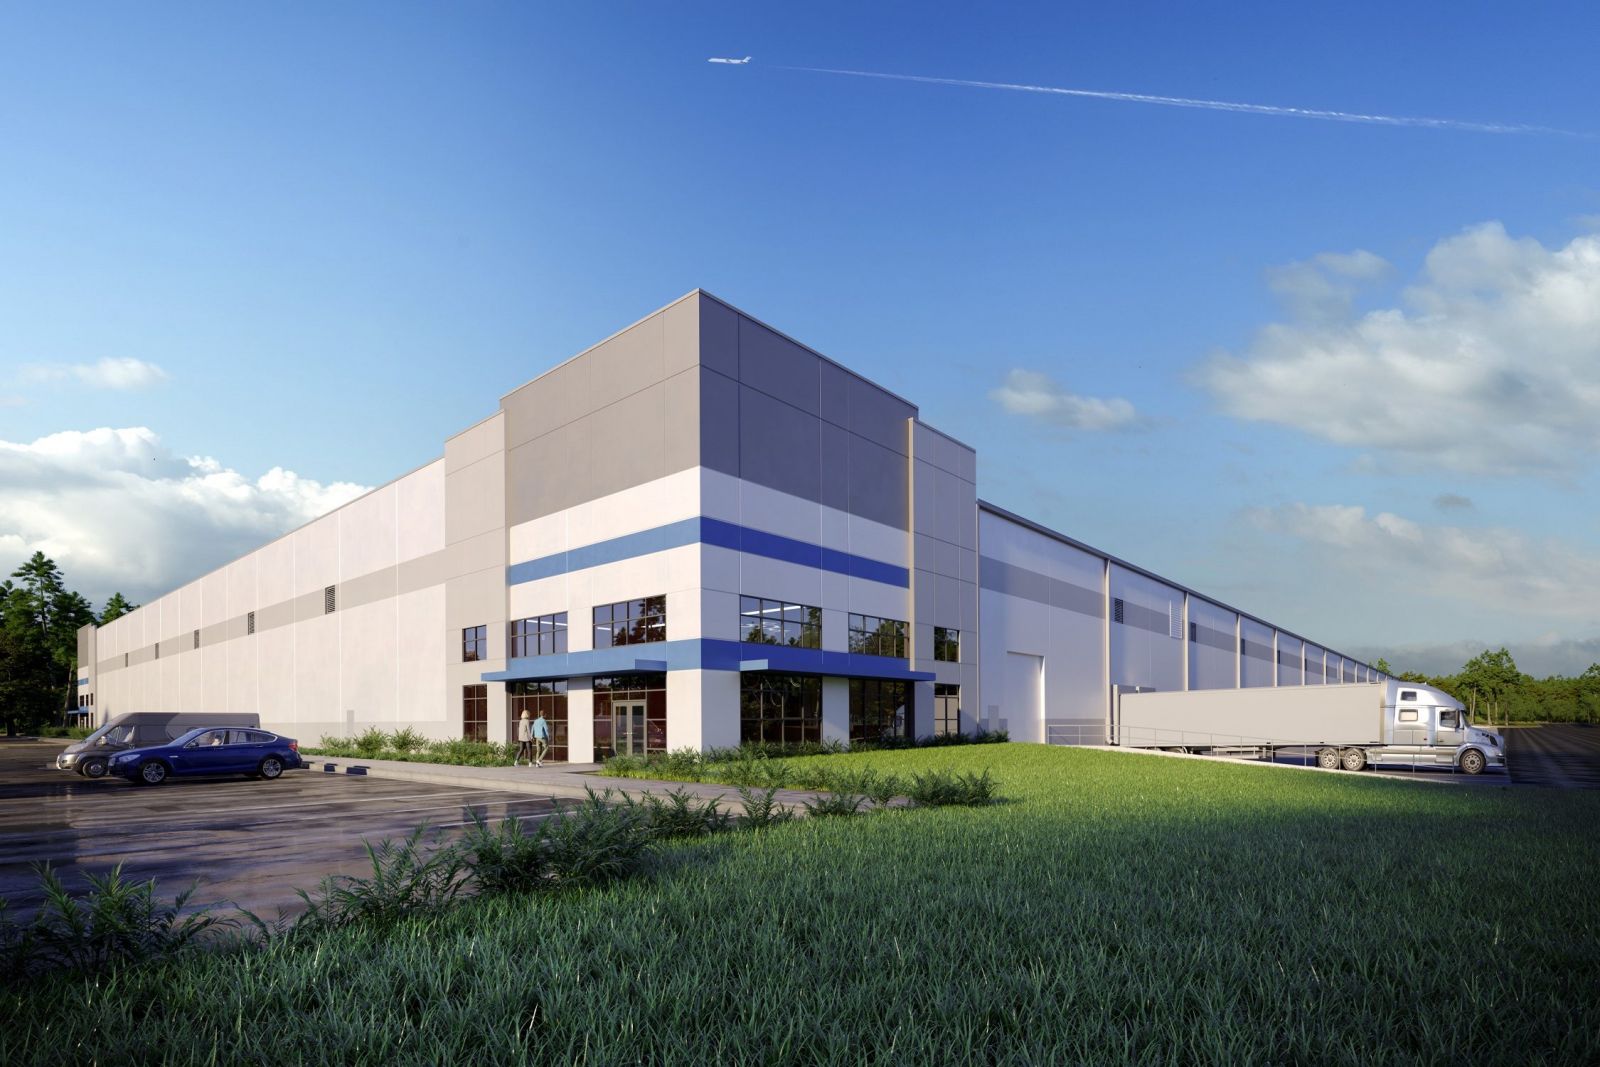 The 476,280-square-foot distribution center is located adjacent to the incoming $450 Walmart distribution center. (Rendering/Provided)